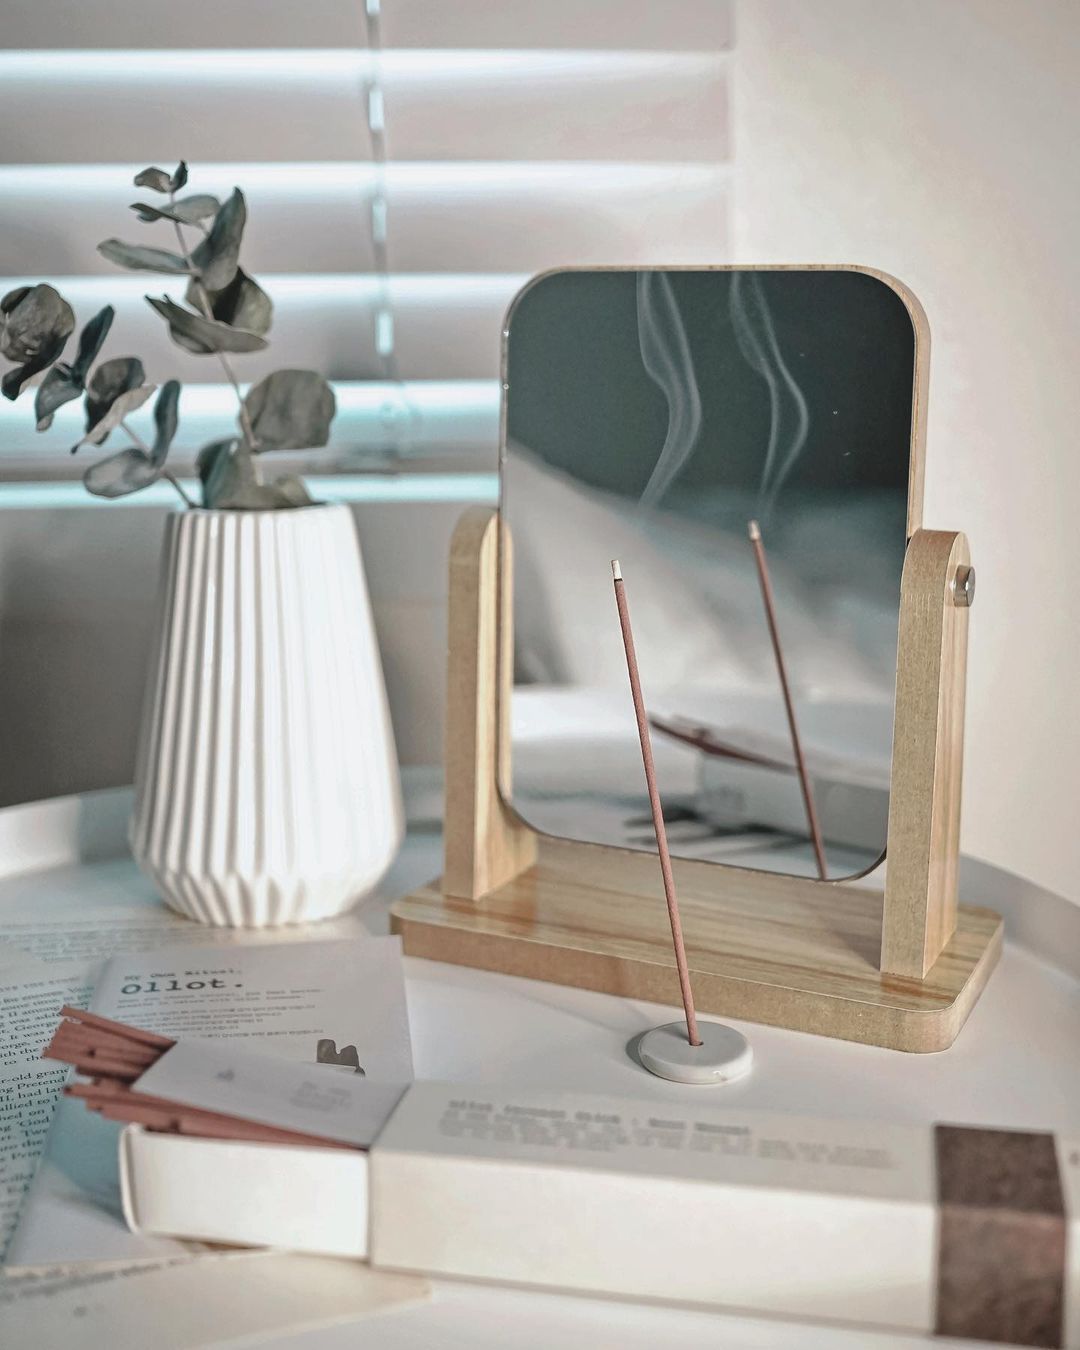 A promotional image of incense sticks from Ollot. (Found Corporation)